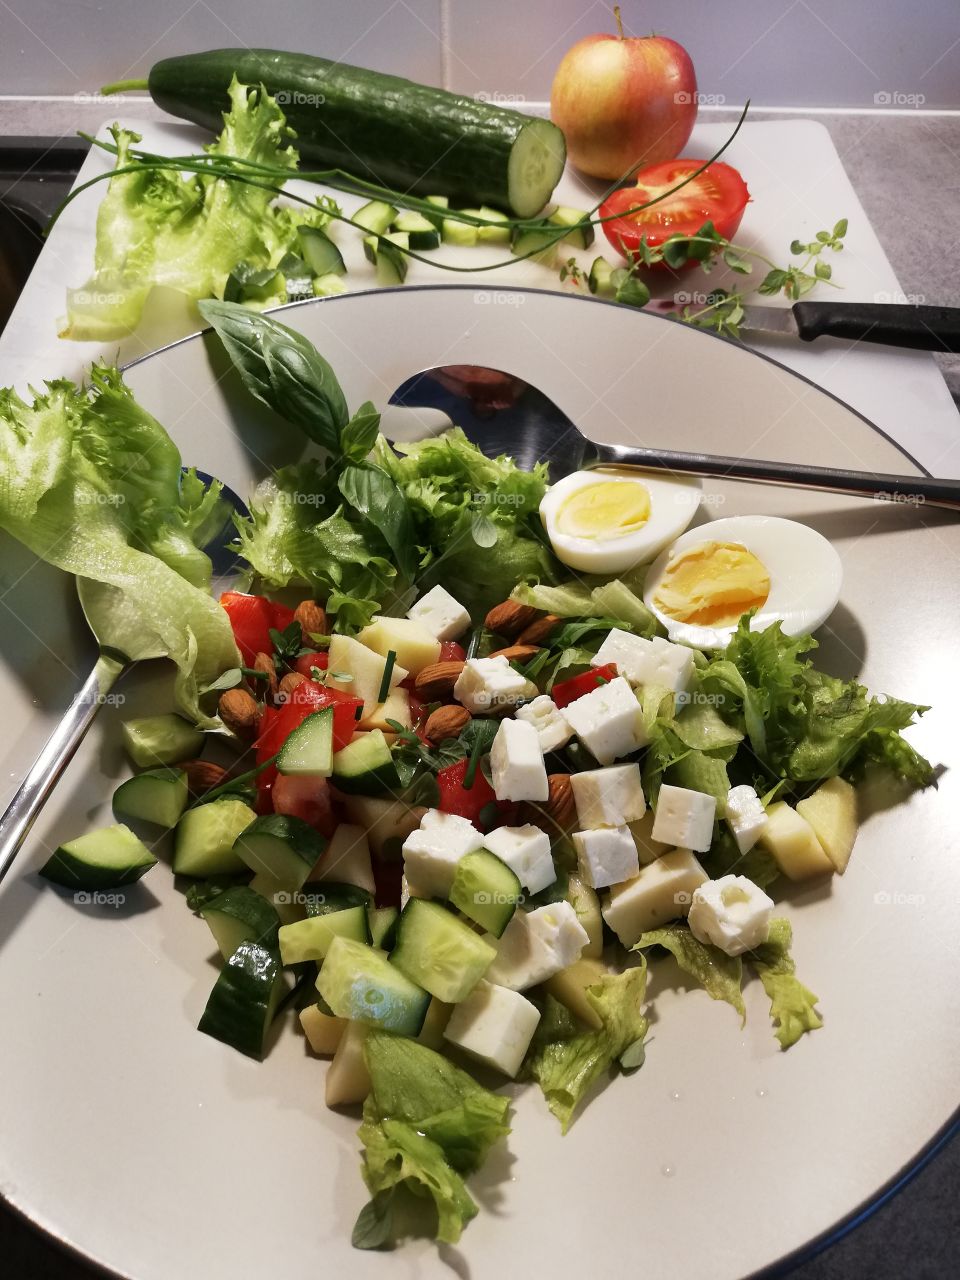 Delicious salad in the bowl with the handles. Lettuce, cucumber, tomato, cheese, almond, boiled egg, apple, chives, thyme, basil and salad dressing. In the background some ingredients on the chopping board.